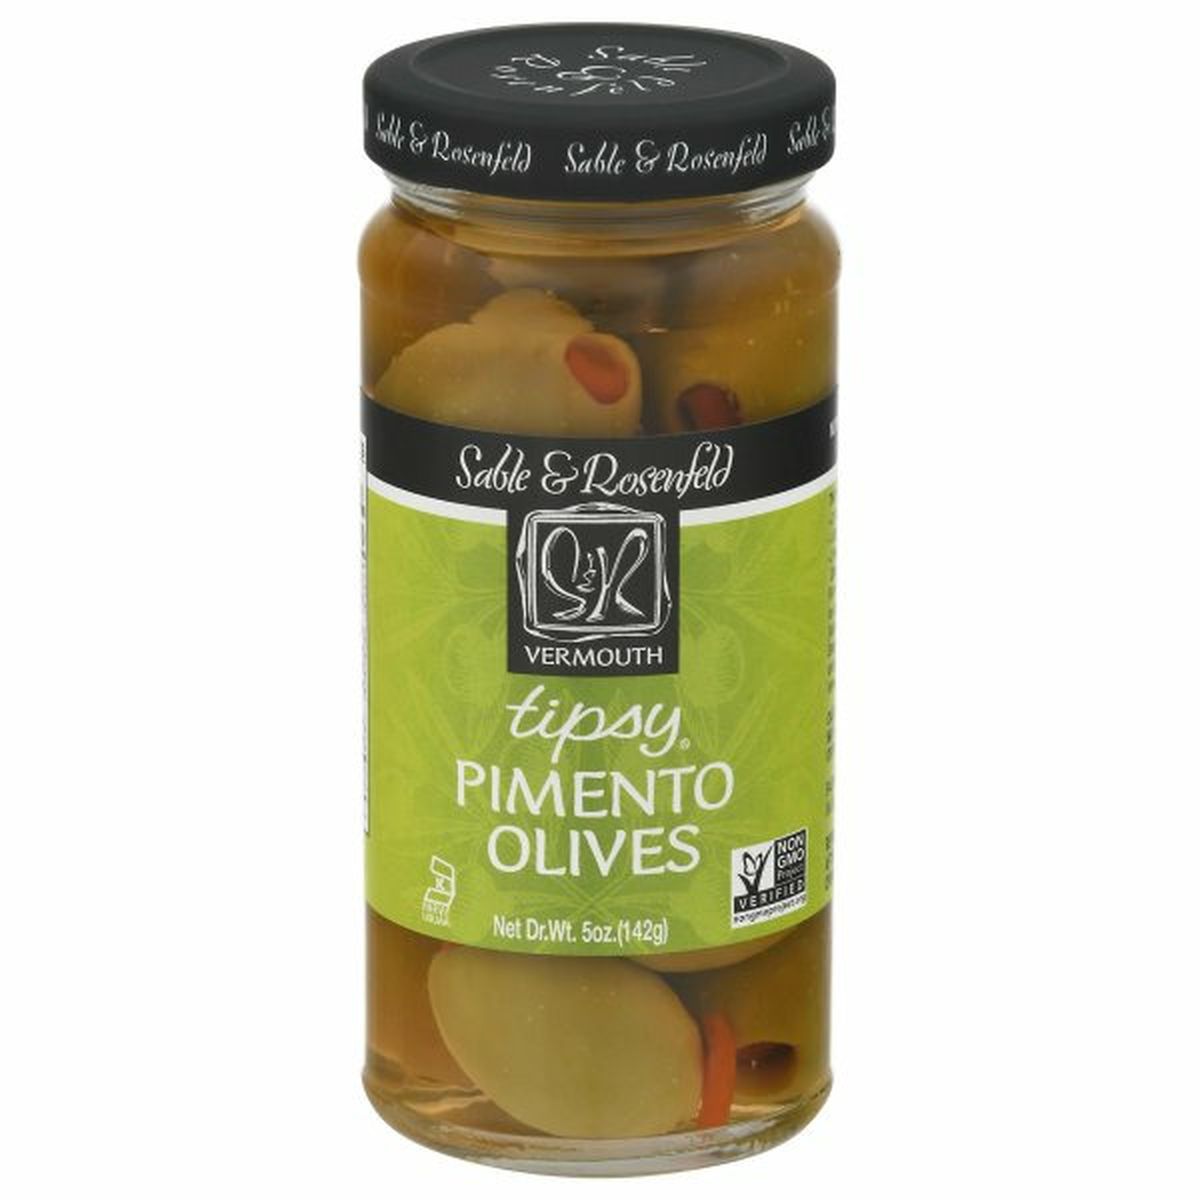 Calories in Sable & Rosenfeld Tipsy Pimento Olives